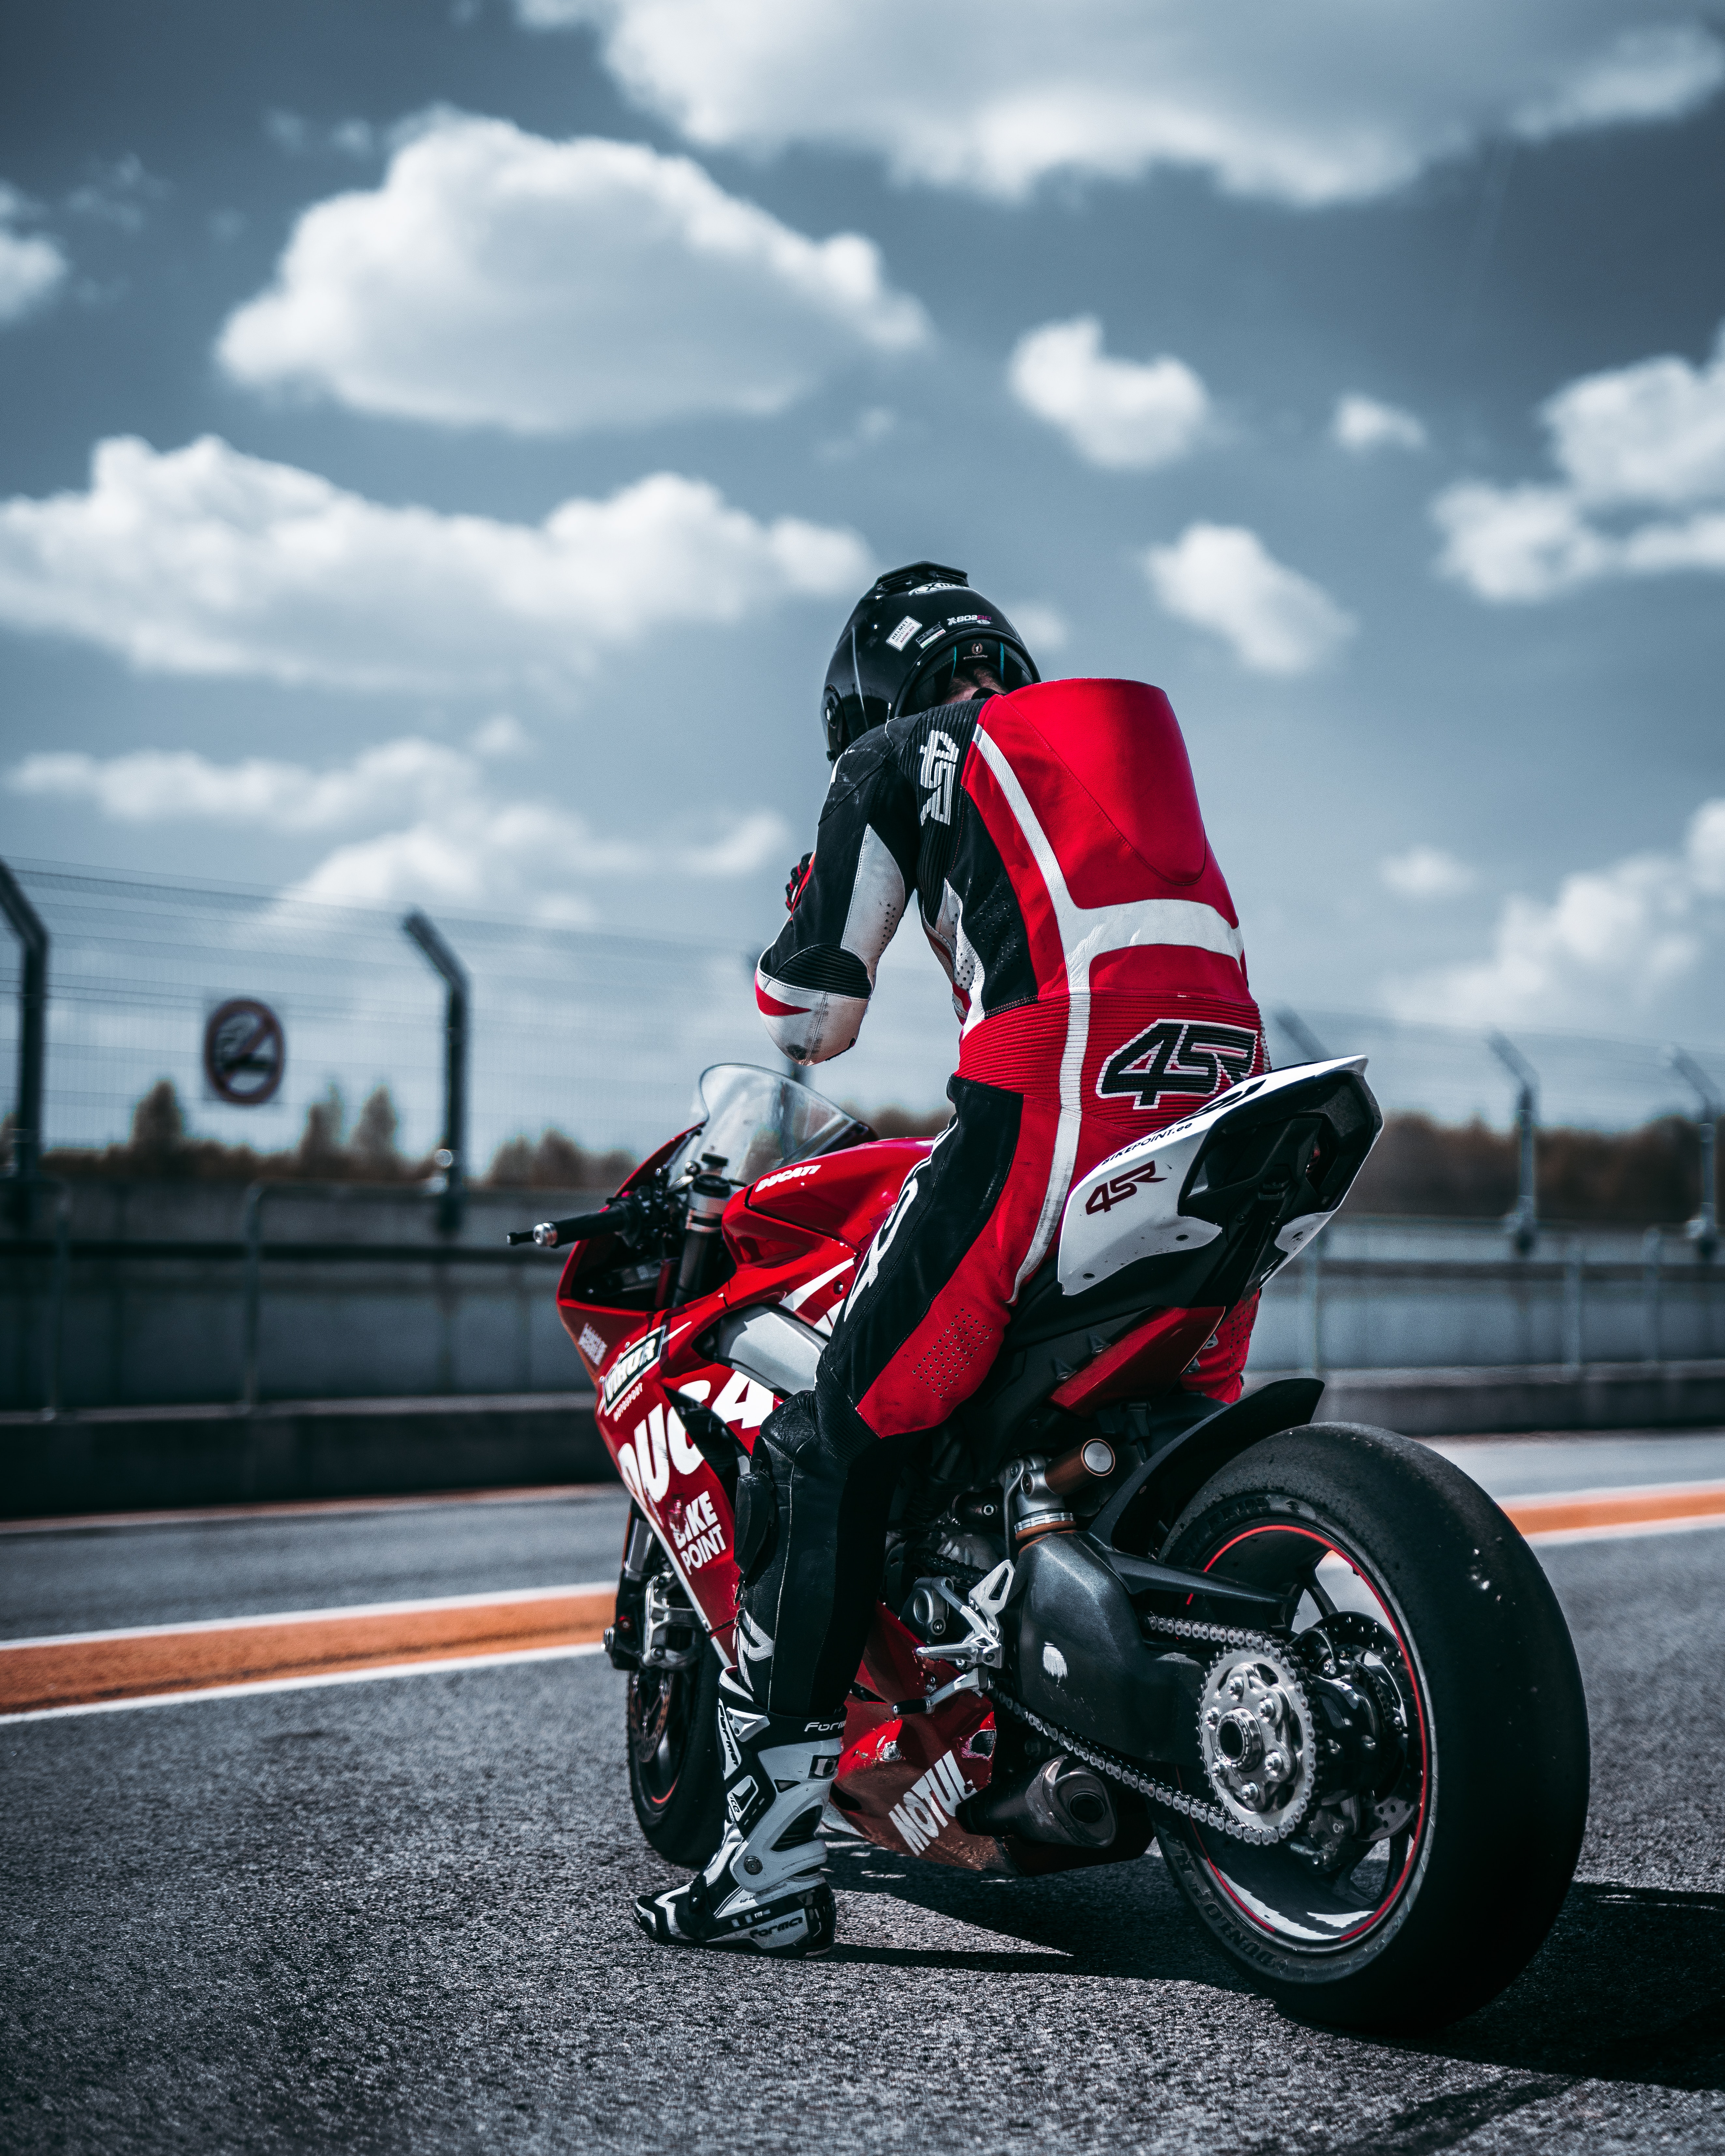 motorcycles, sports, motorcycle, racer HD Wallpaper for Phone